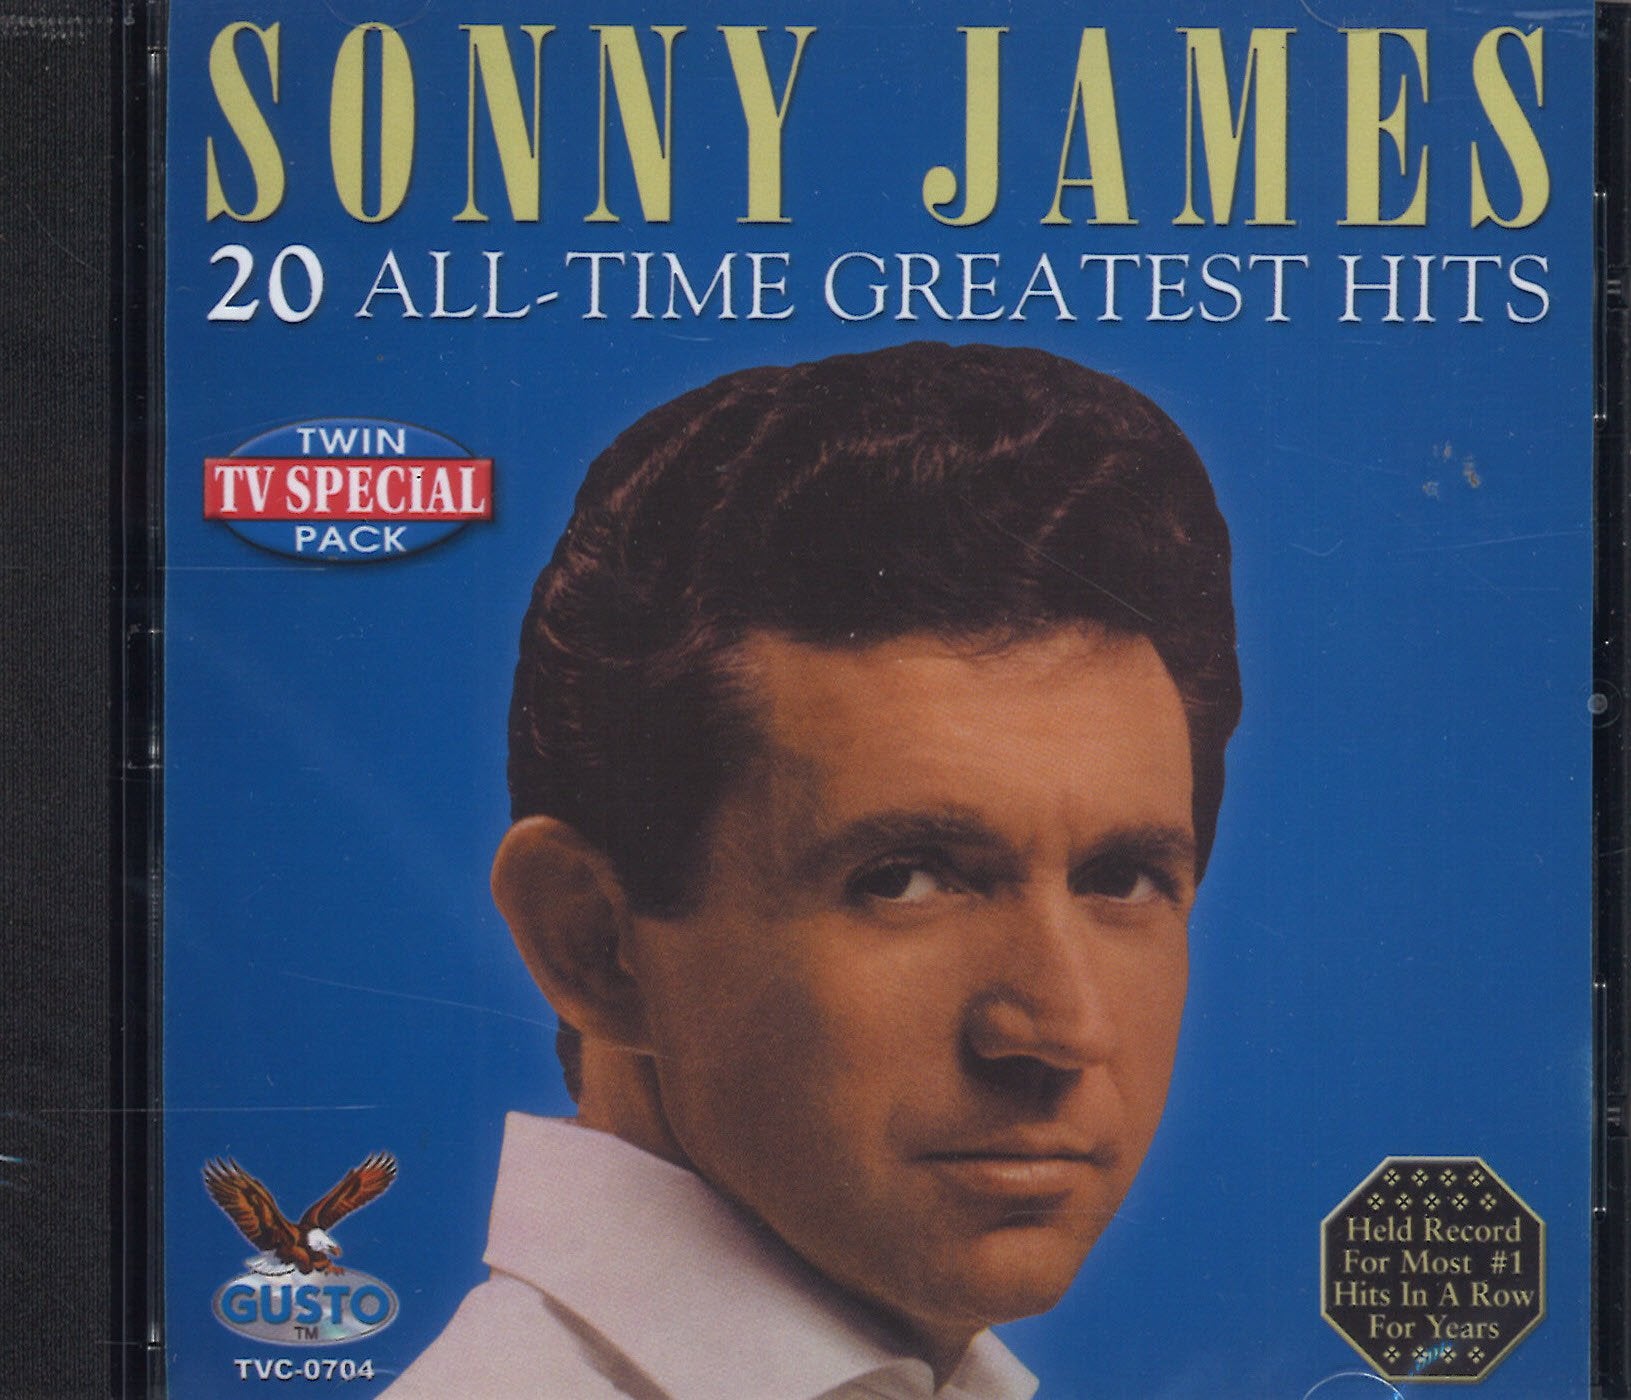 Sonny James 20 All-Time Greatest Hits